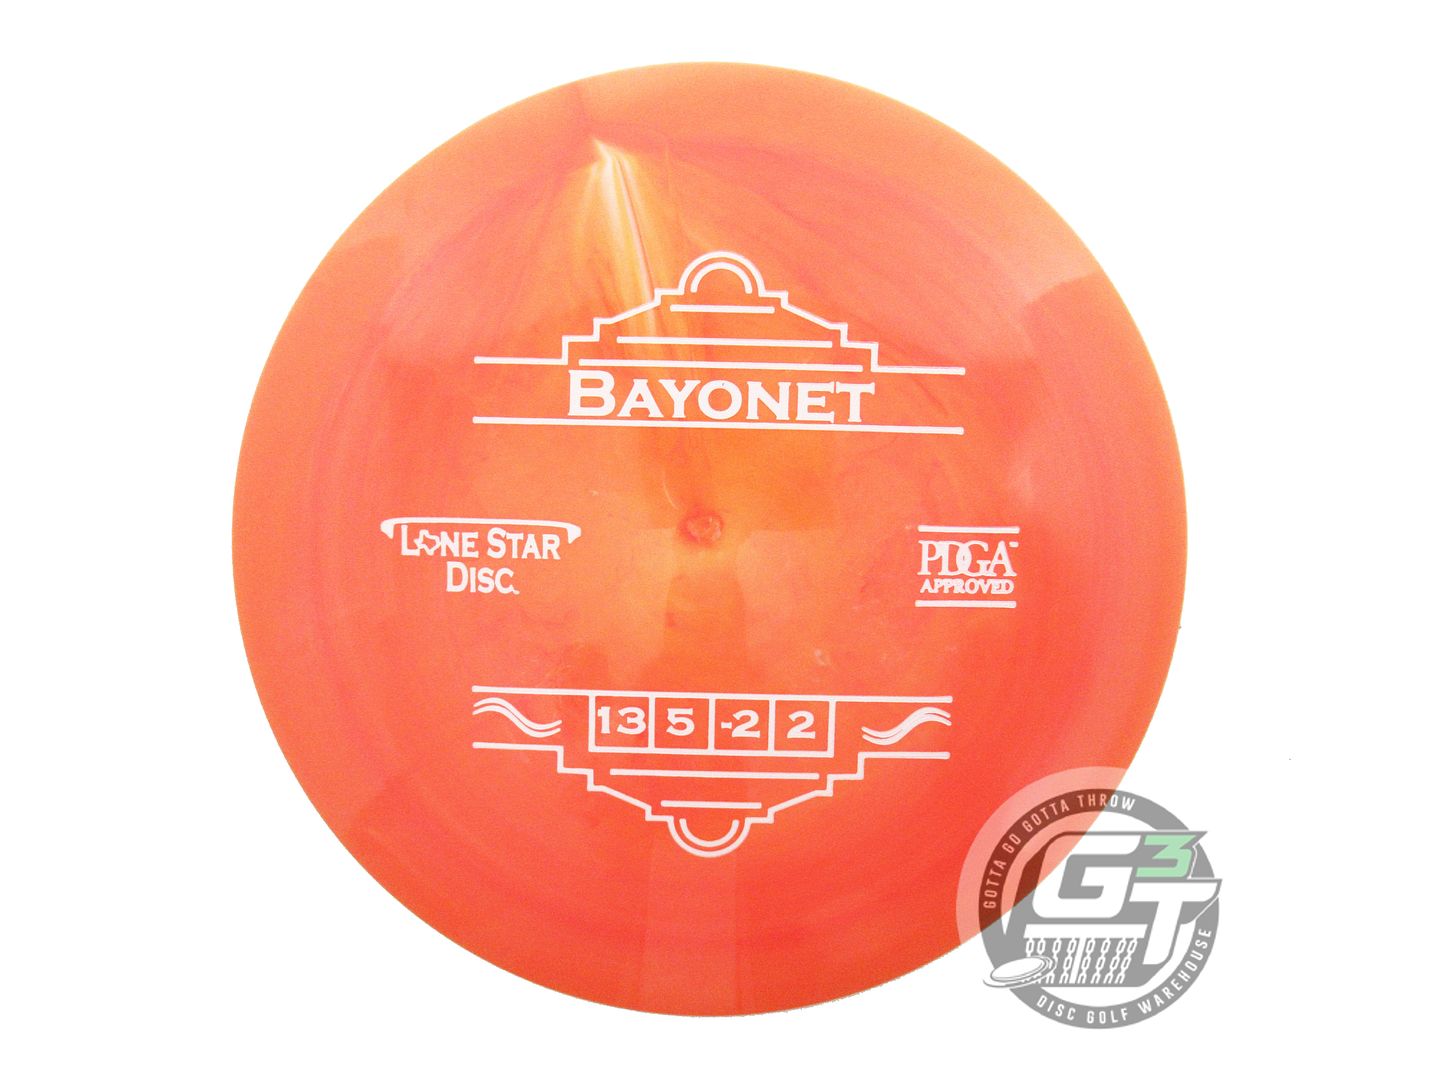 Lone Star Bravo Bayonet Distance Driver Golf Disc (Individually Listed)